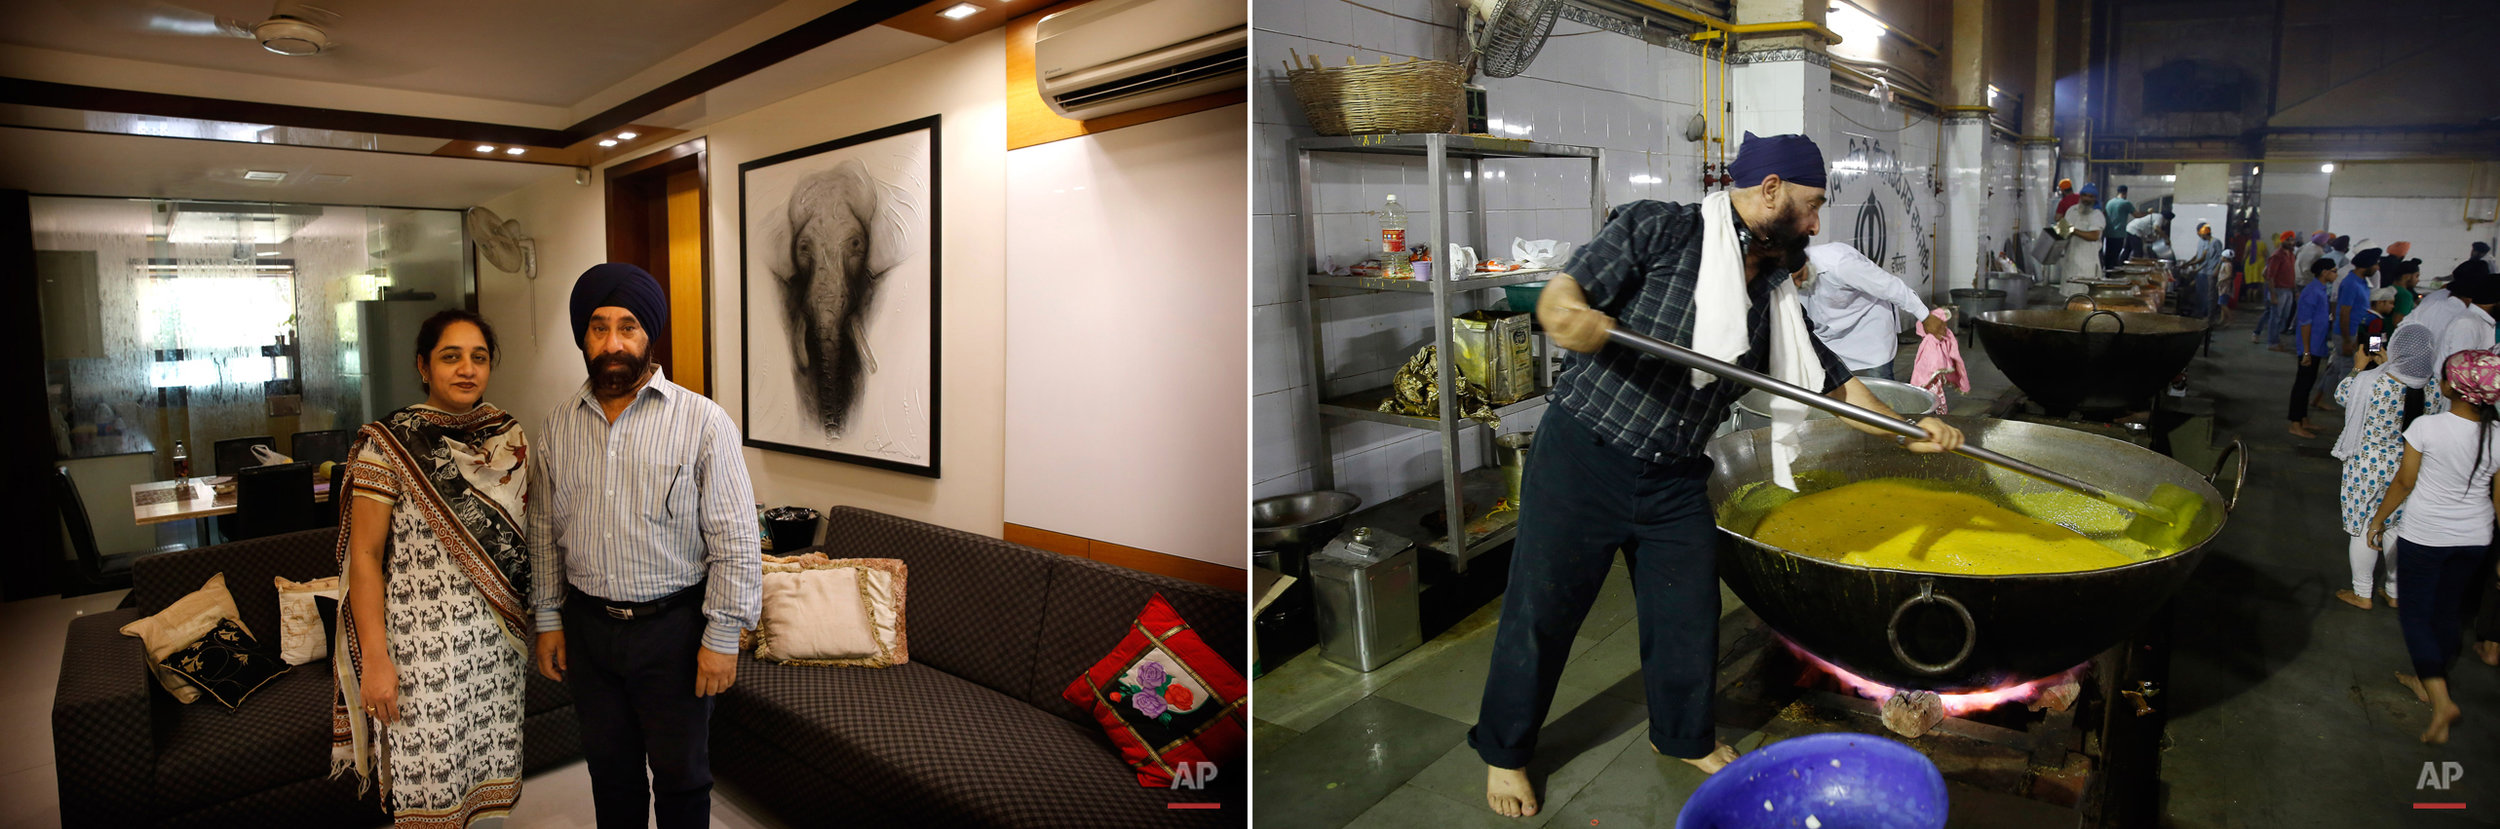  This two picture combo shows on left, Harpreet Singh poses with his wife at their house in New Delhi, India, on May 28, 2015, as on right, he prepares langar, or free community meal, at Bangla Sahib Gurudwara or Sikh temple, on May 23, 2015, in New 